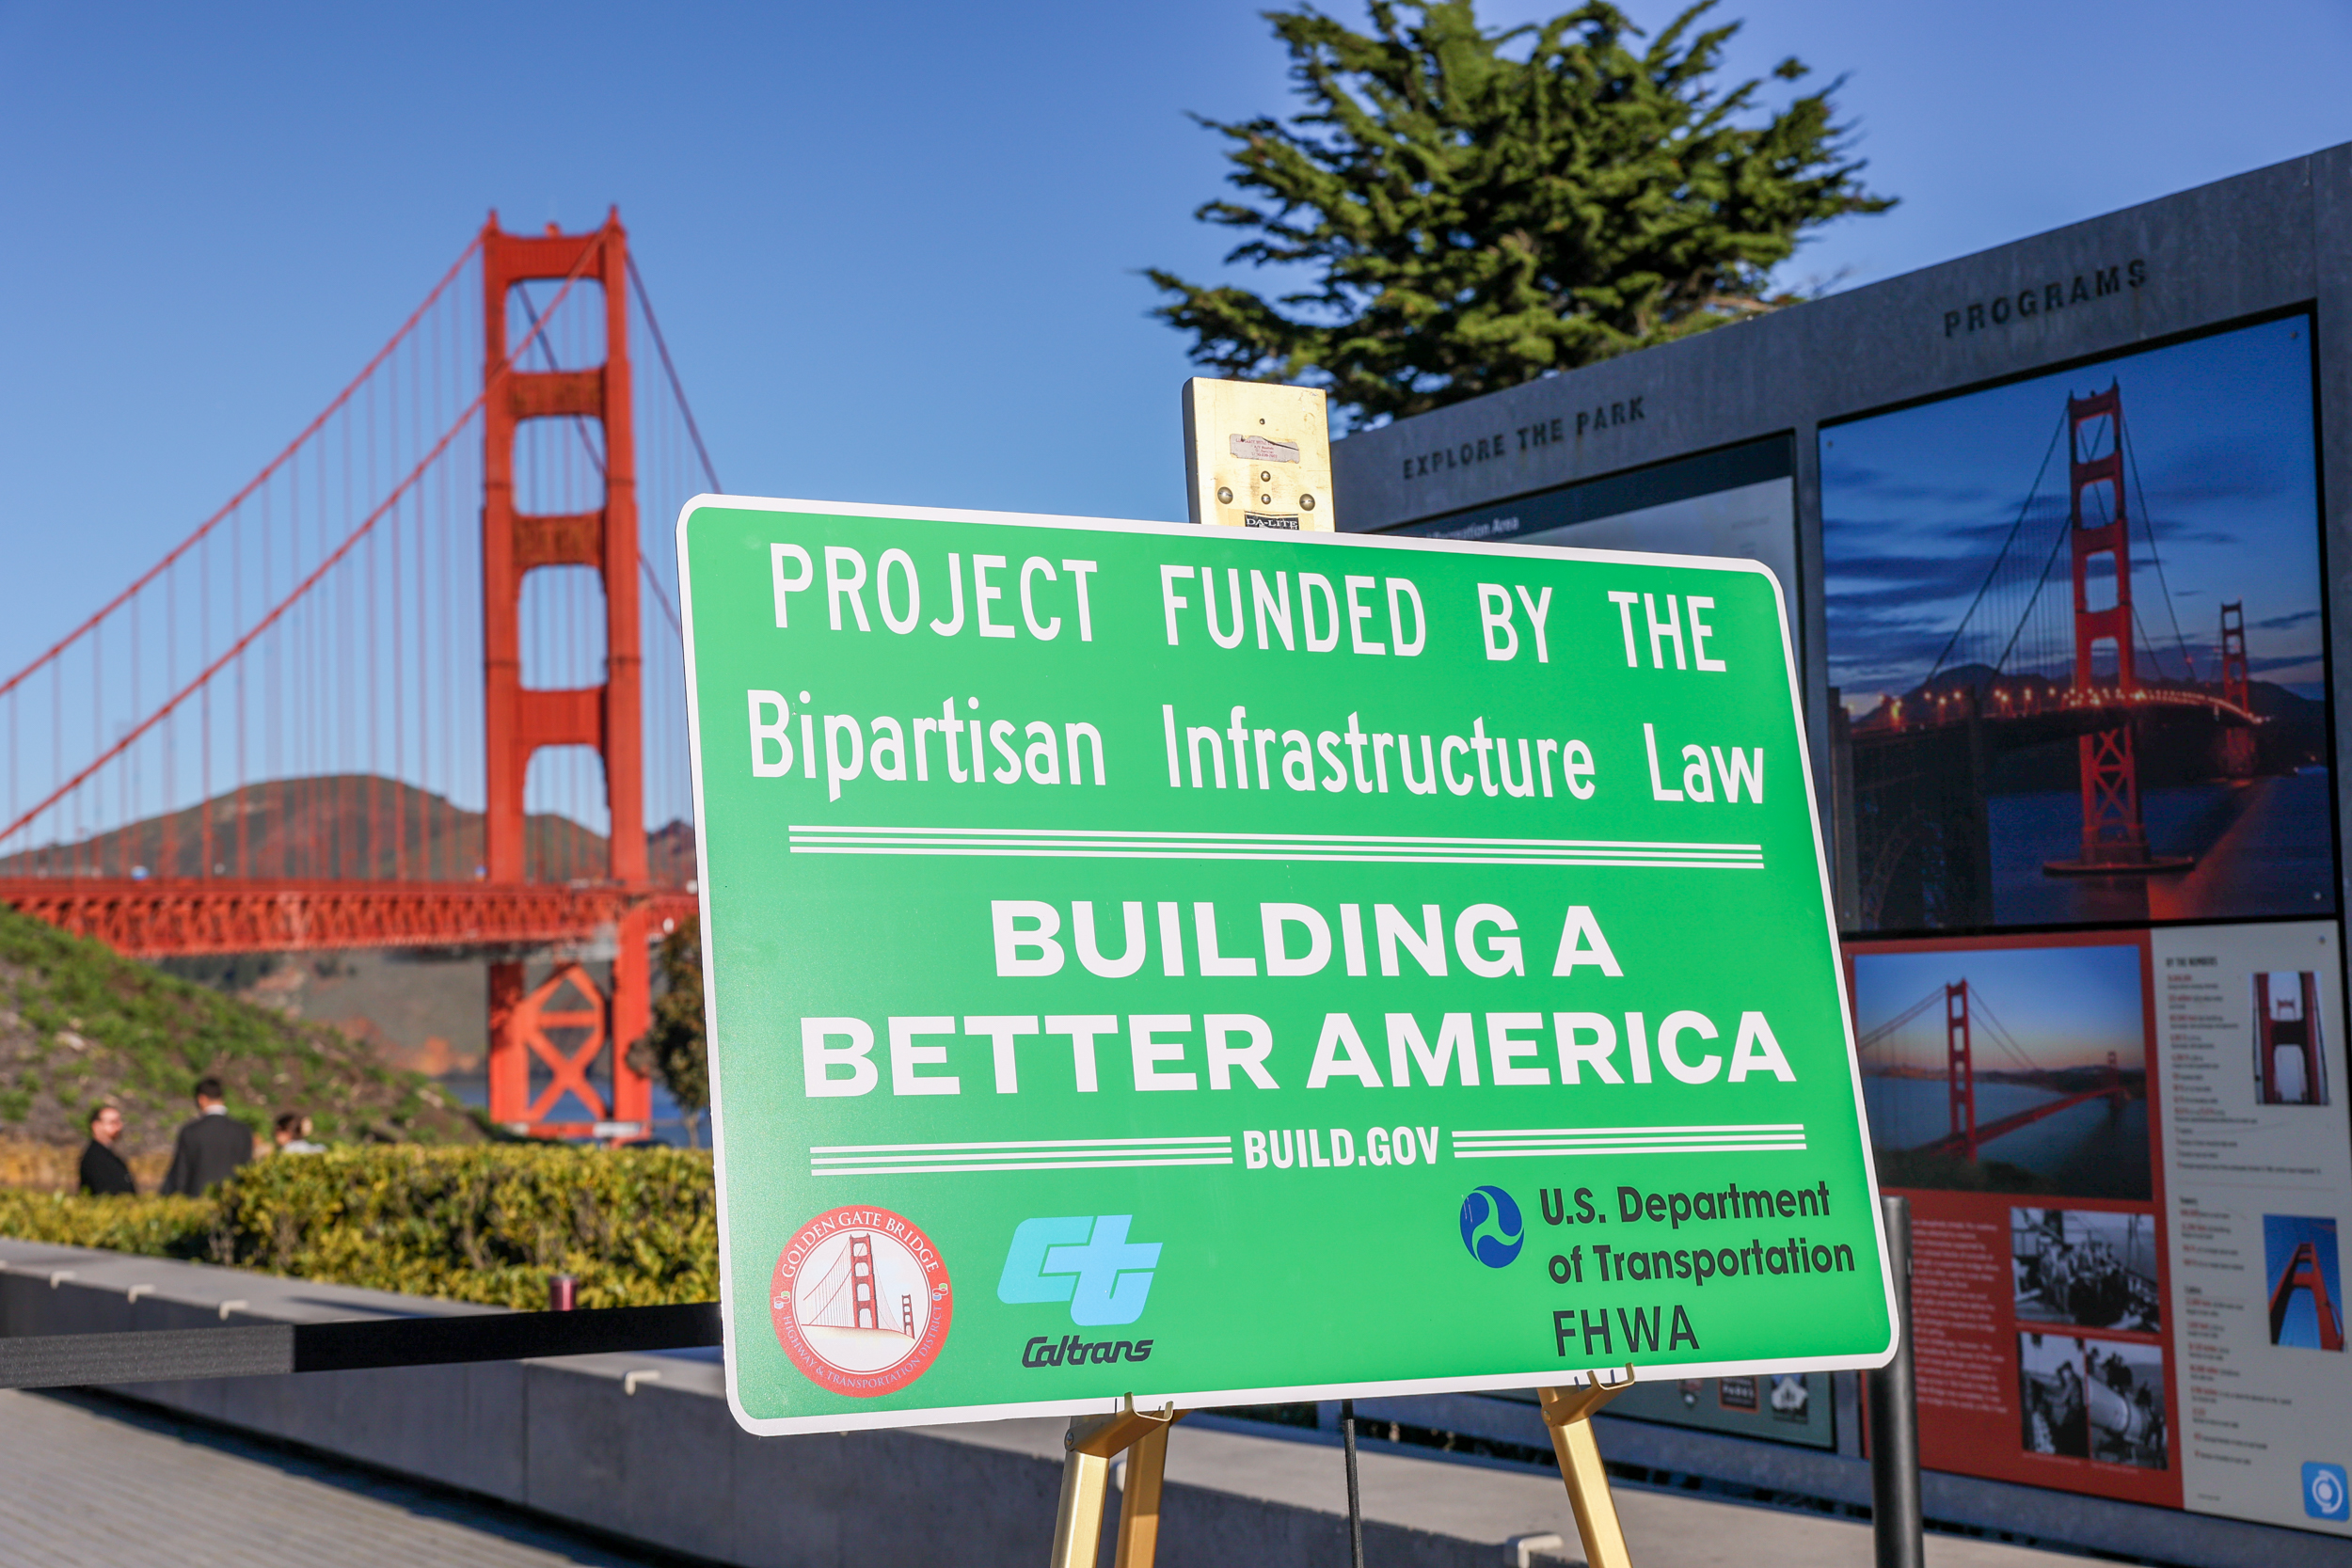 The Golden Gate Bridge Was Just Awarded Millions in Federal Funds. Where Is That Money Going?